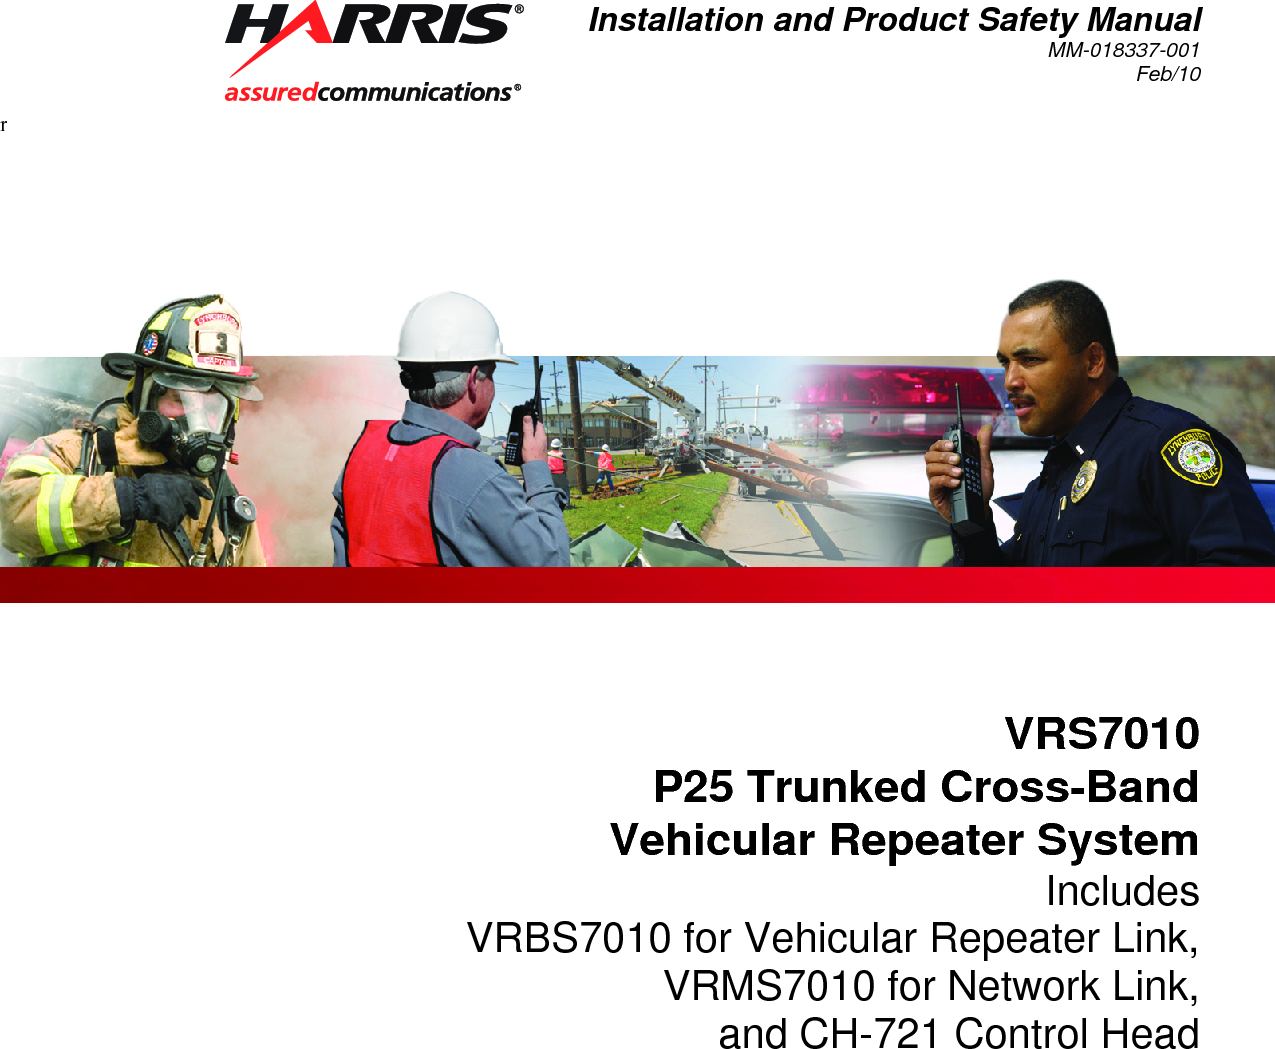 Installation and Product Safety Manual MM-018337-001 Feb/10  rVRS7010 P25 Trunked Cross-Band Vehicular Repeater System Includes VRBS7010 for Vehicular Repeater Link, VRMS7010 for Network Link, and CH-721 Control Head 